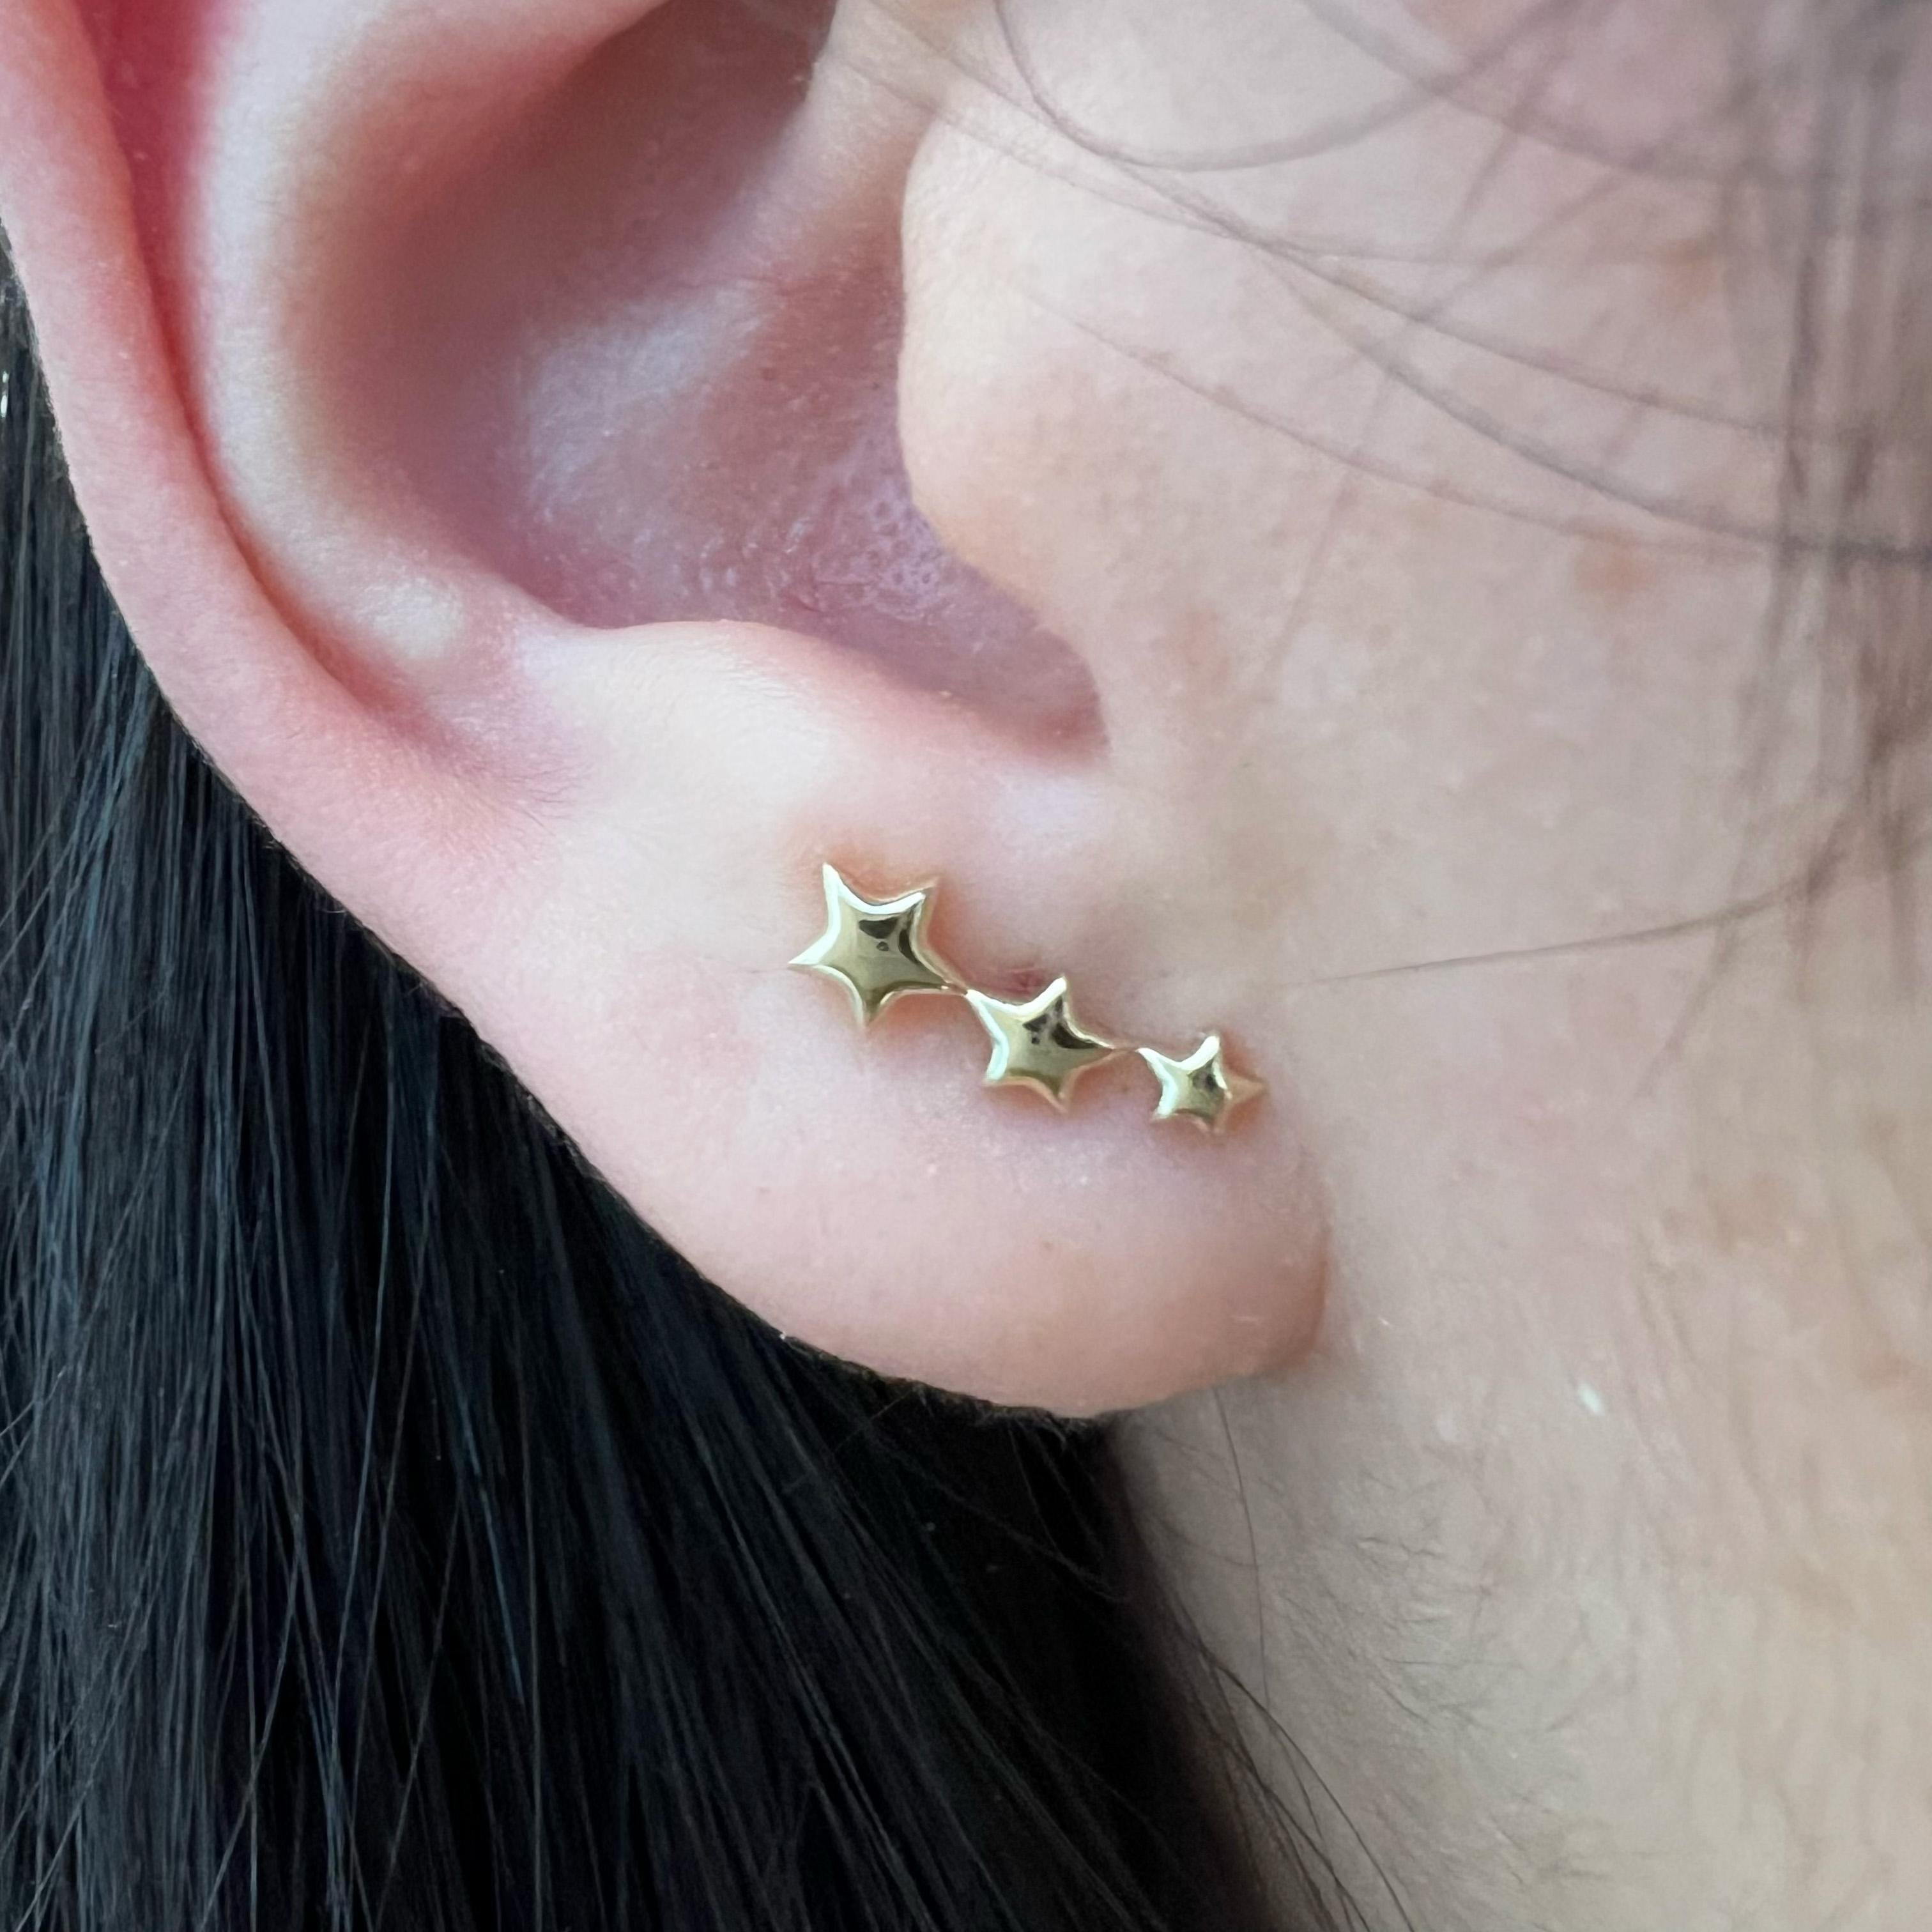 Contemporary Triple Star Single Stud Earring in Solid 14k Yellow Gold EGS14014Y4JJJ LV For Sale